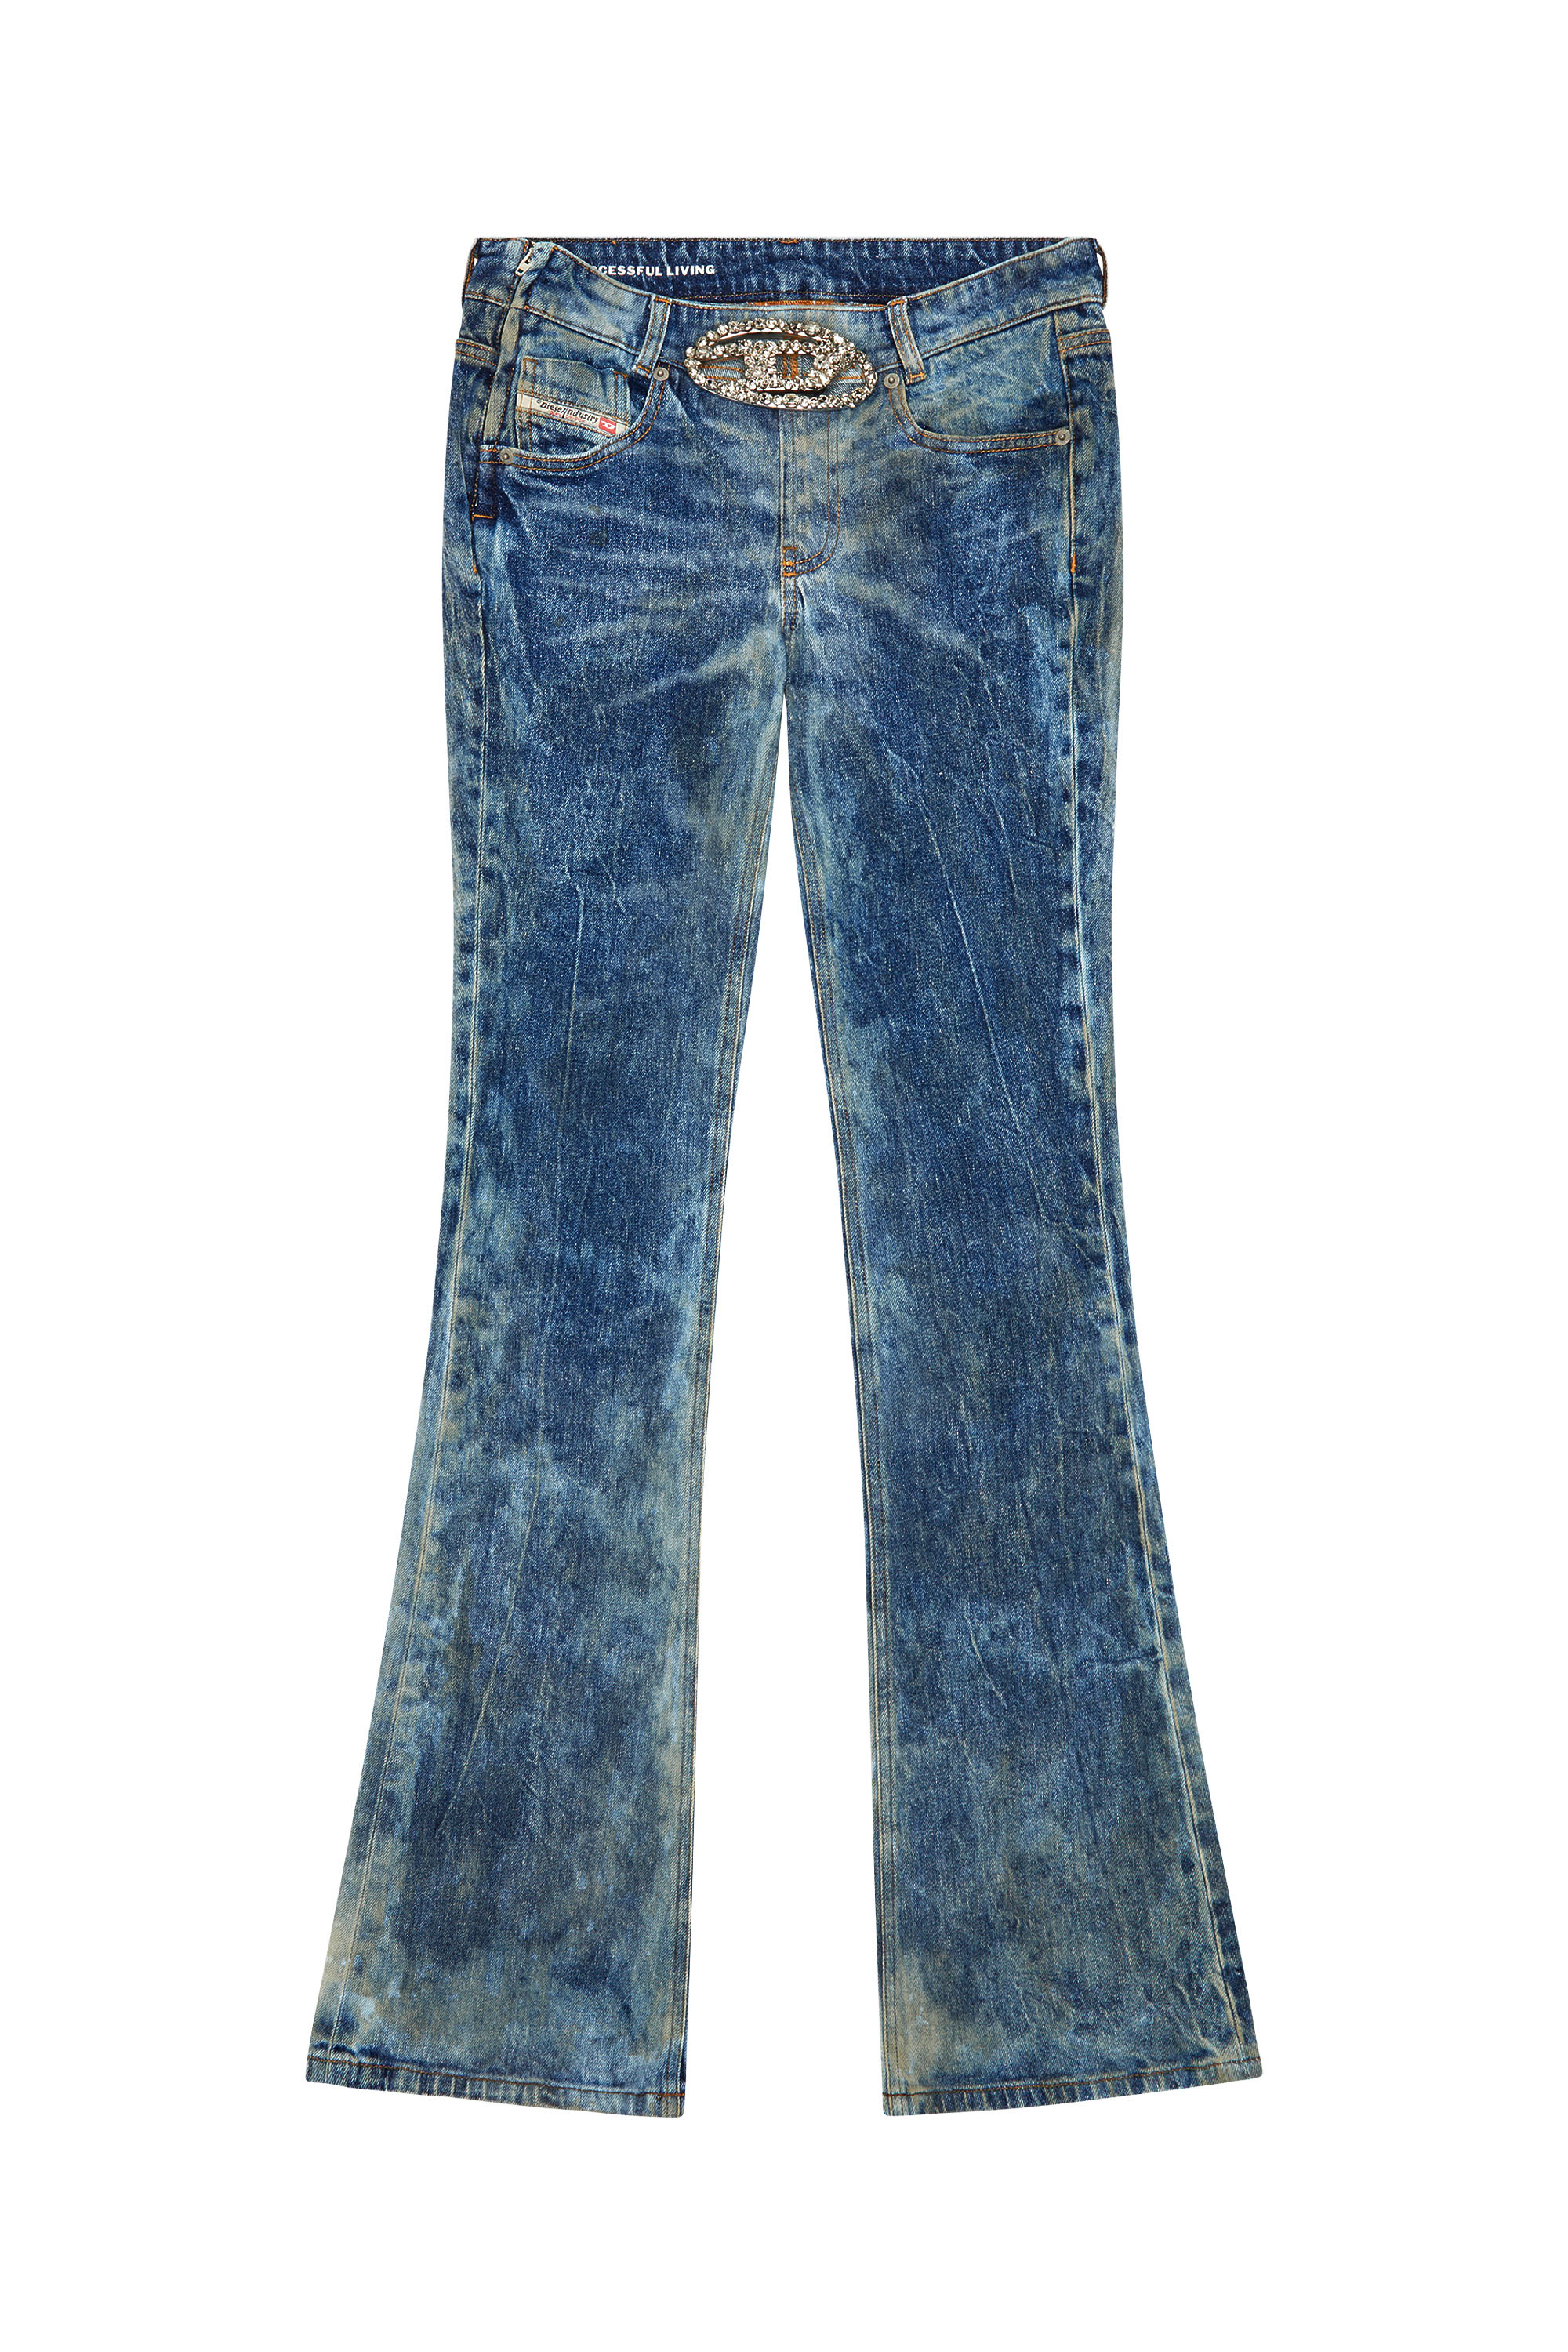 Diesel - Bootcut and Flare Jeans 1969 D-Ebbey 0PGAL, Mujer Bootcut y Flare Jeans - 1969 D-Ebbey in Azul marino - Image 5